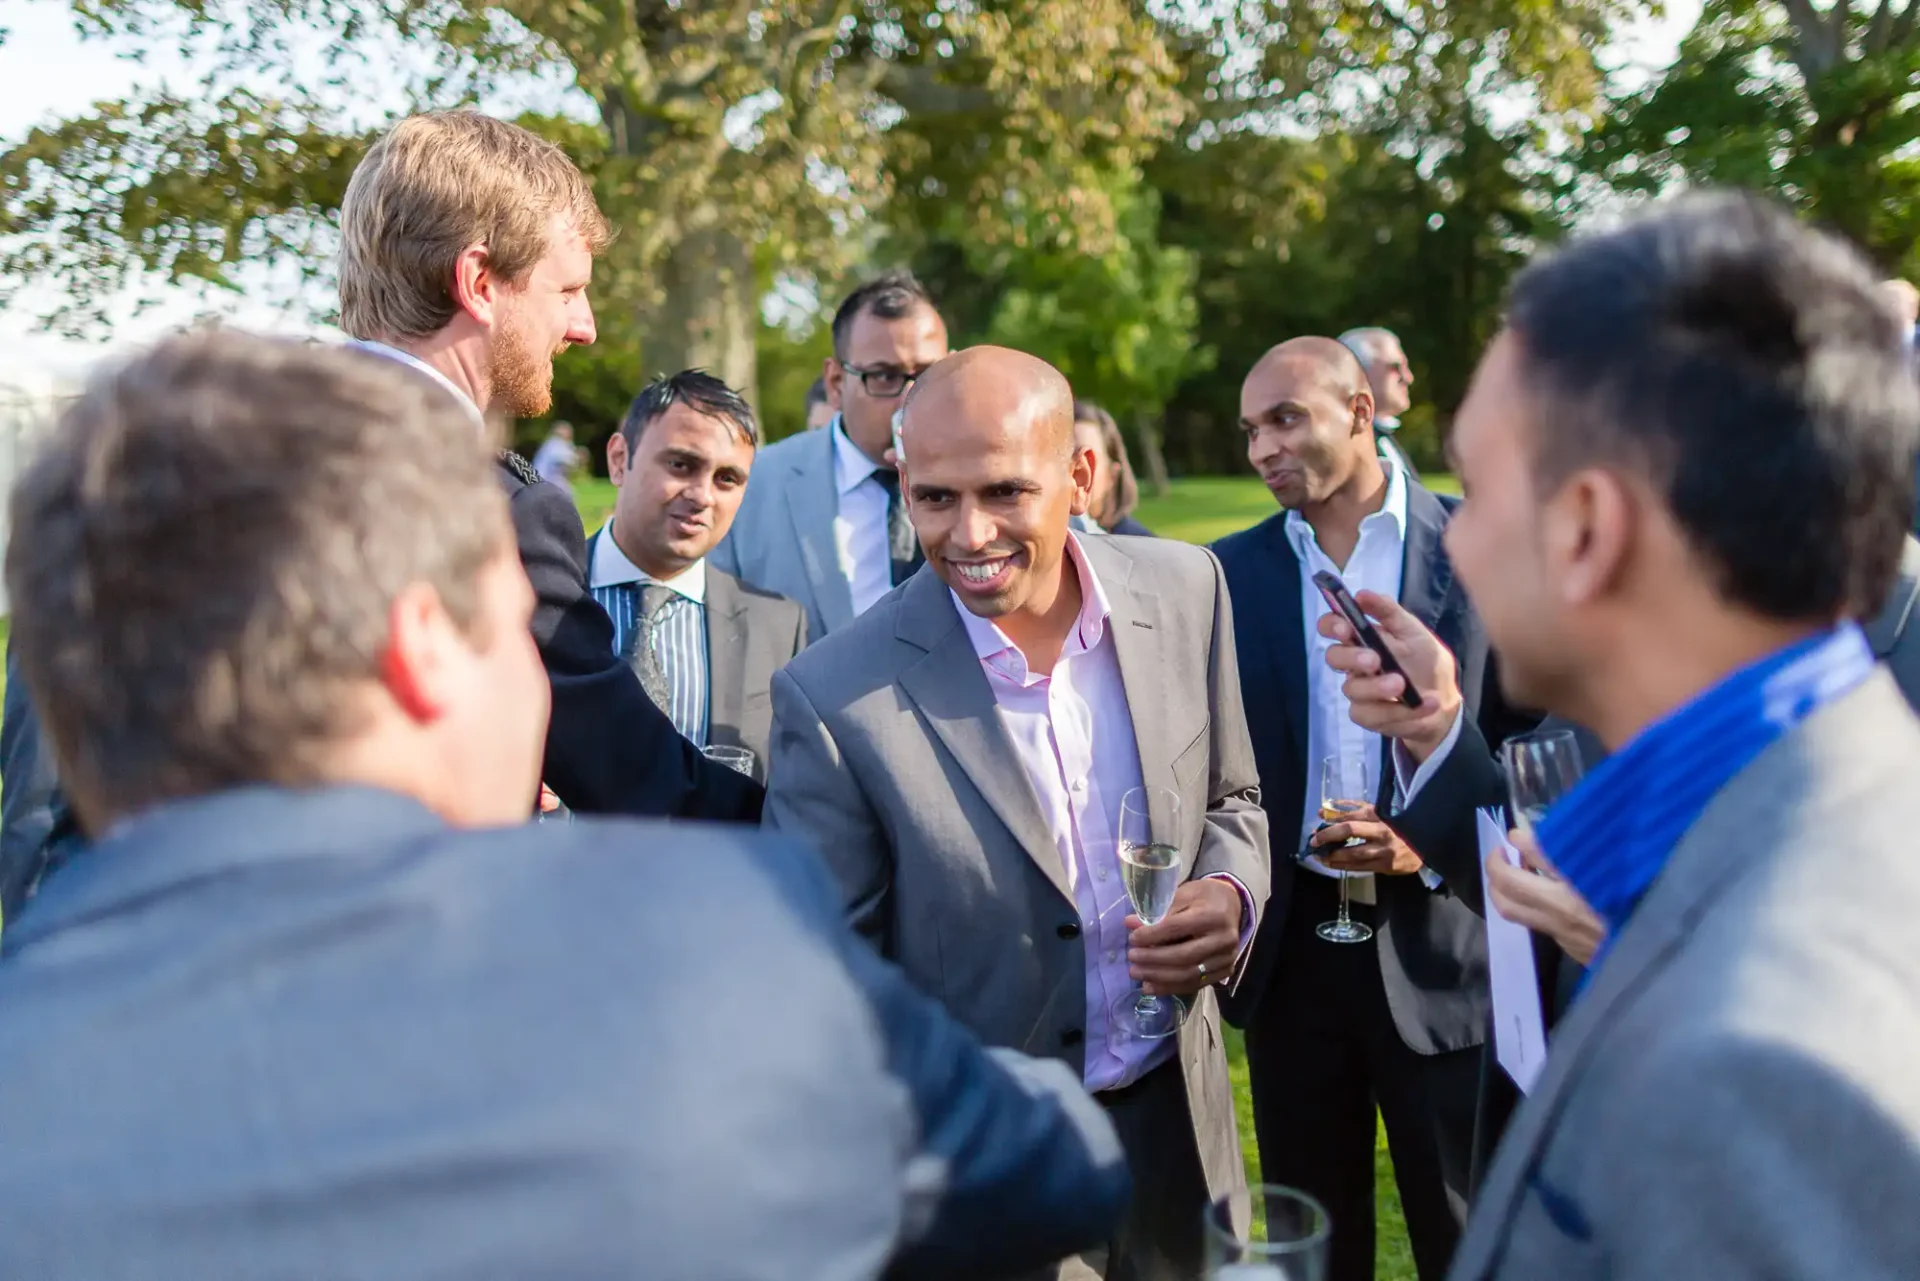 Group of men in business attire conversing at an outdoor event, some holding drinks. one man in the center is smiling broadly.